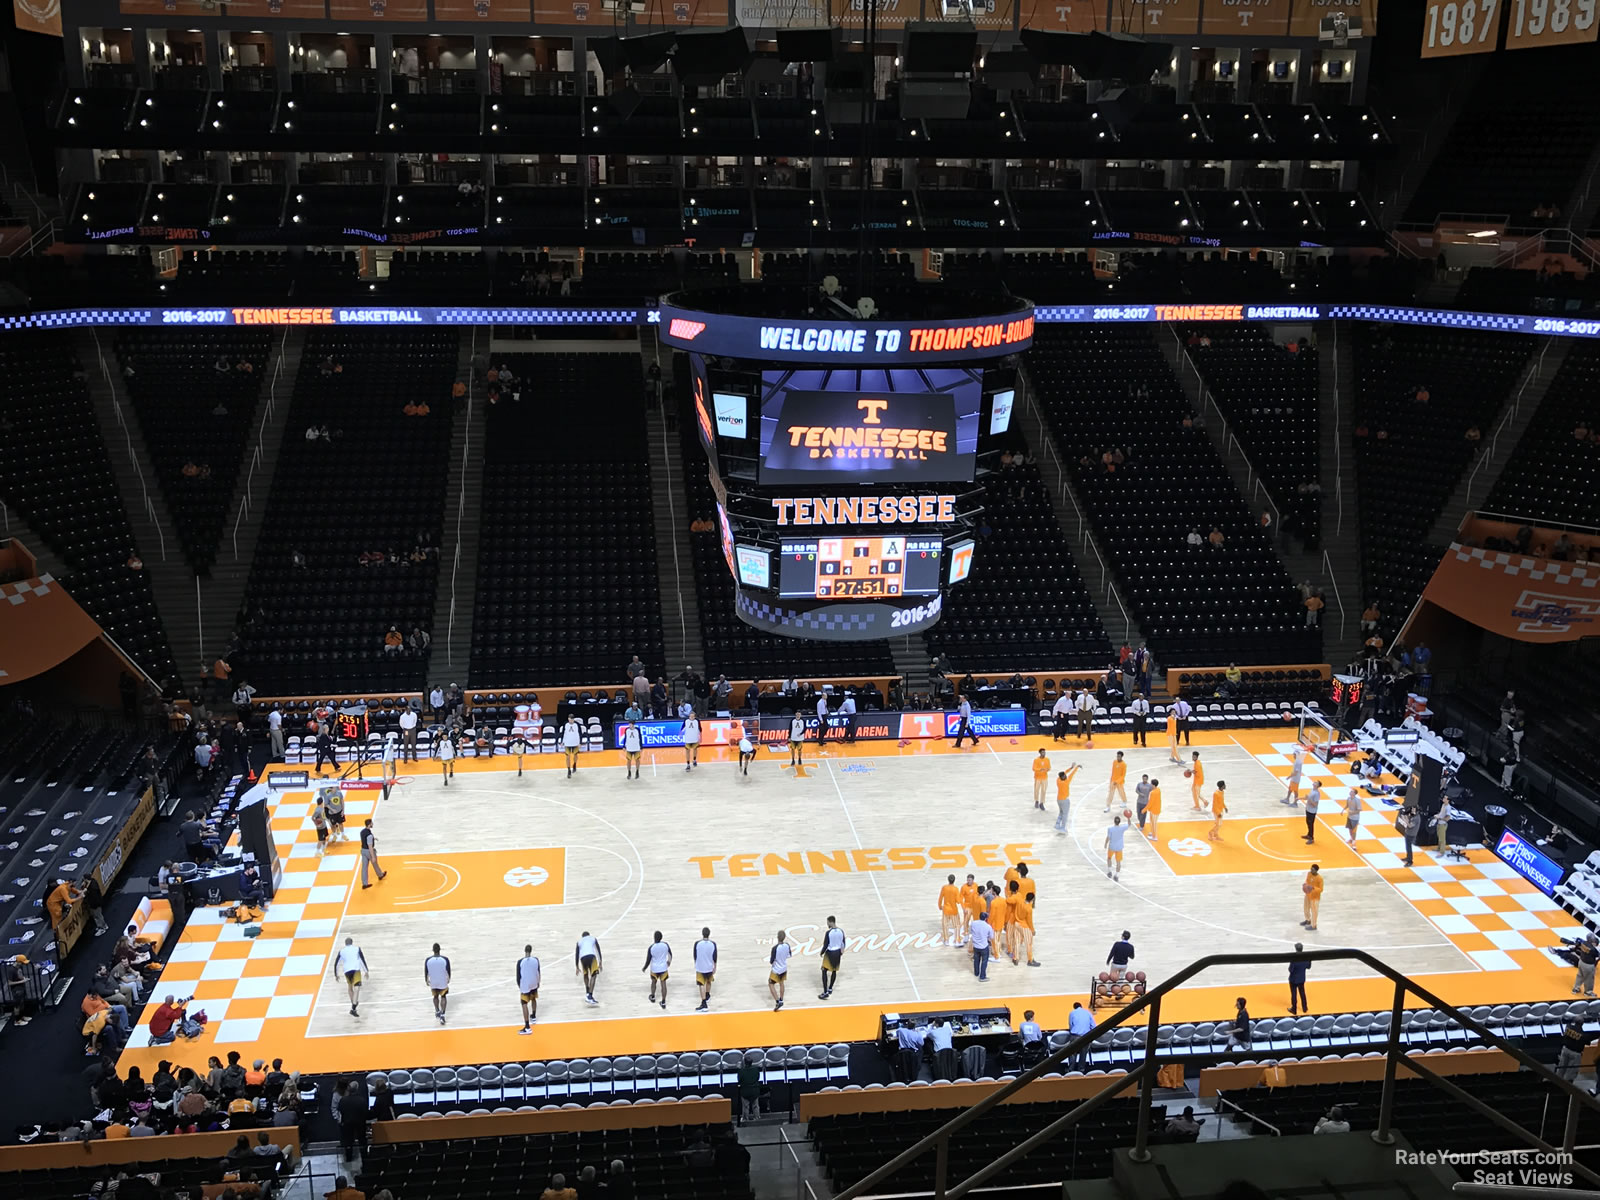 Thompson-Boling Arena Section 322 - RateYourSeats.com